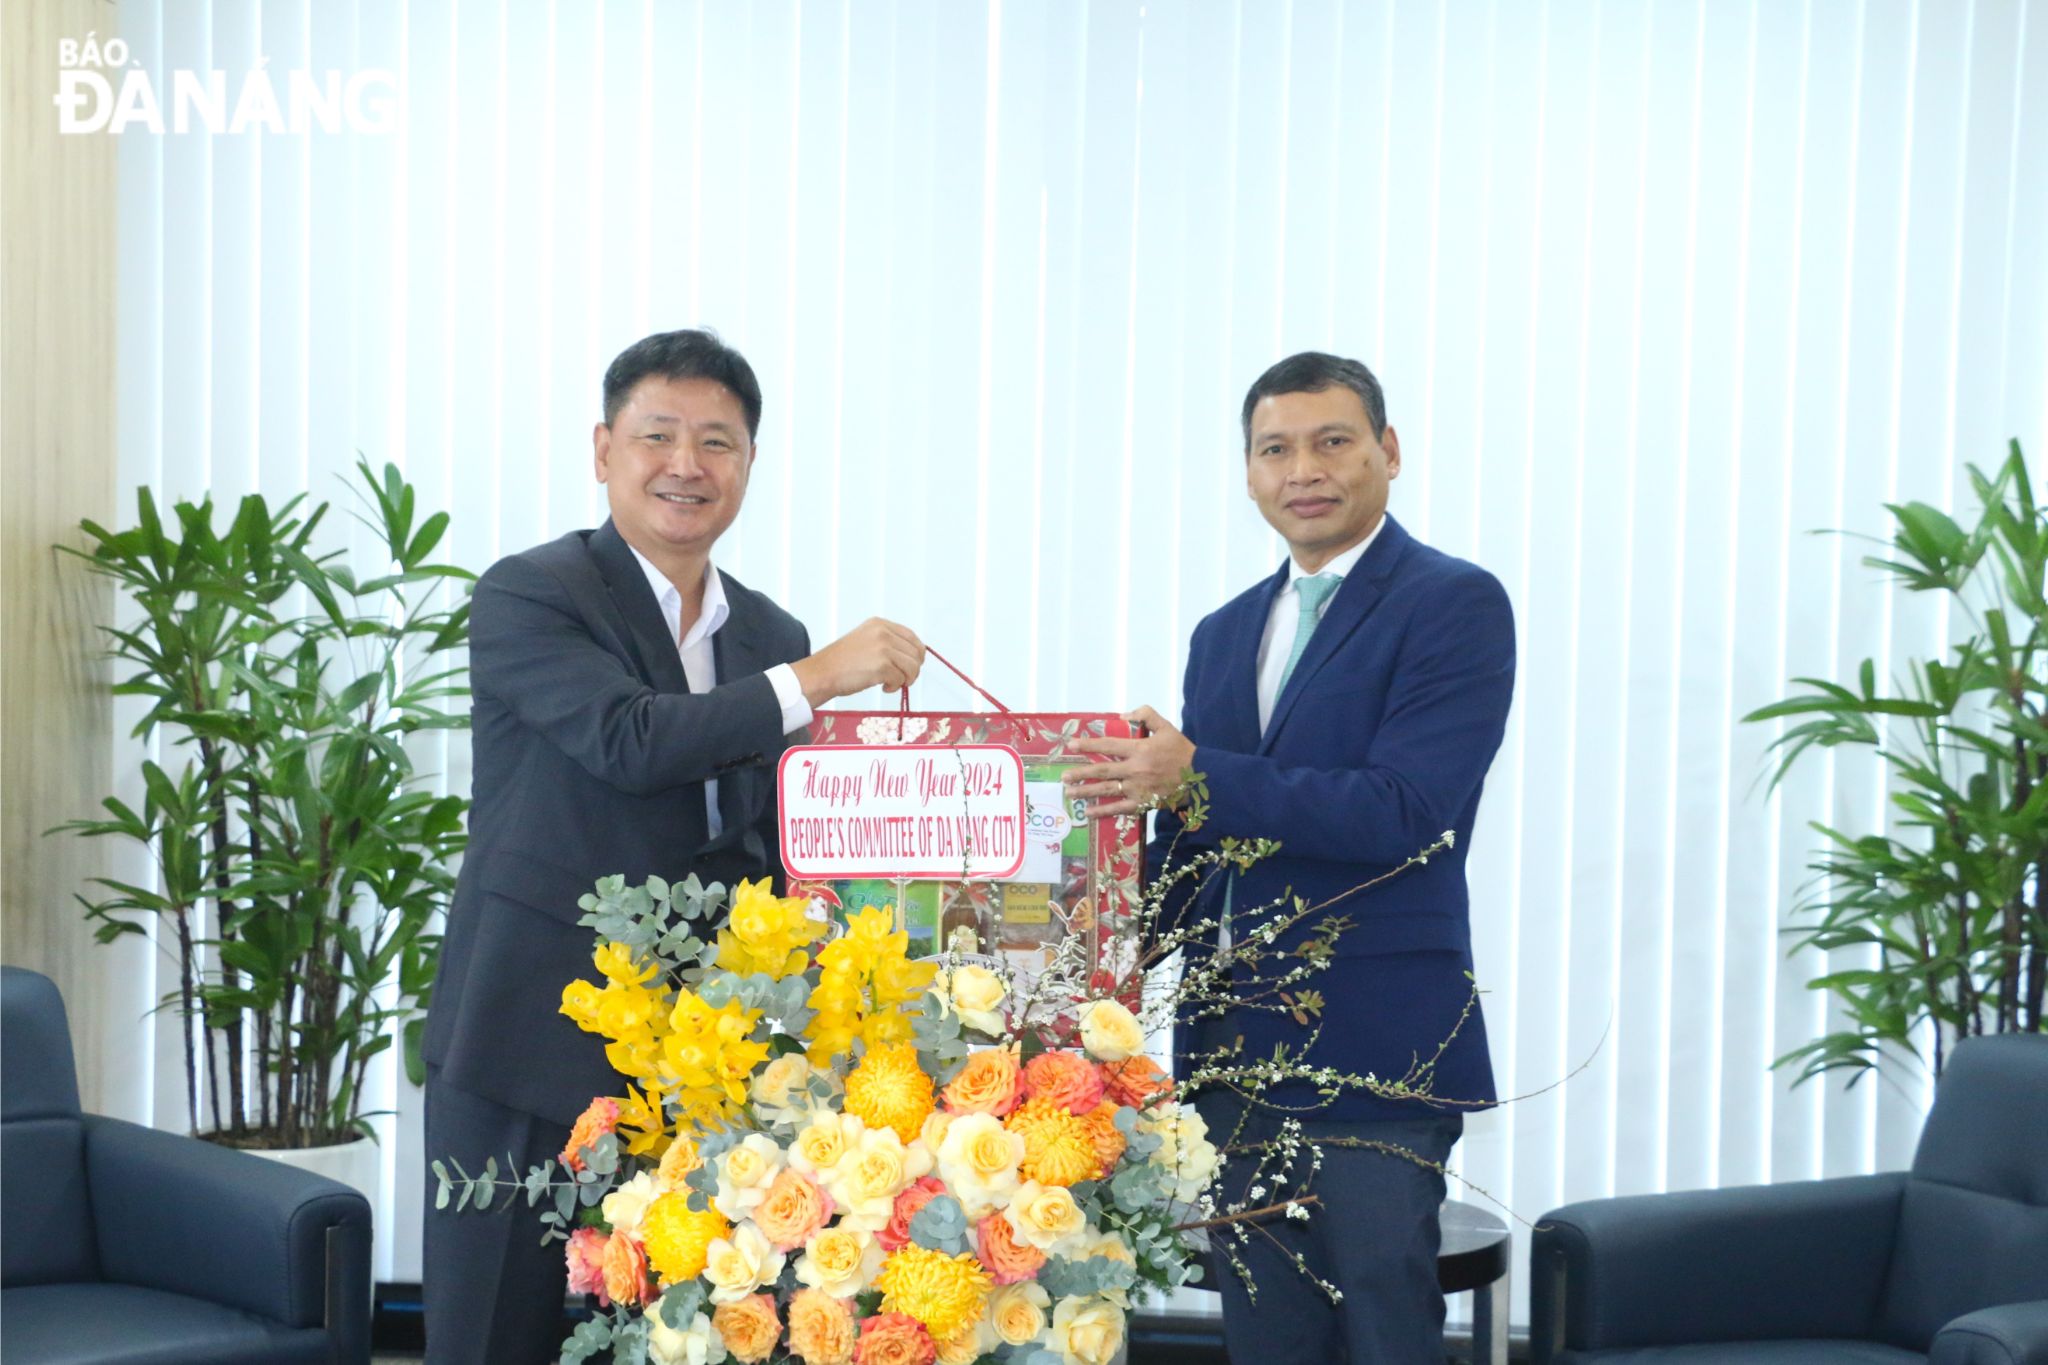 Municipal People's Committee Vice Chairman Ho Ky Minh (right) congratulating the Consul General and staff of the South Korean Consulate General in Da Nang on the occasion of Lunar New Year 2024. Photo: T.PHUONG